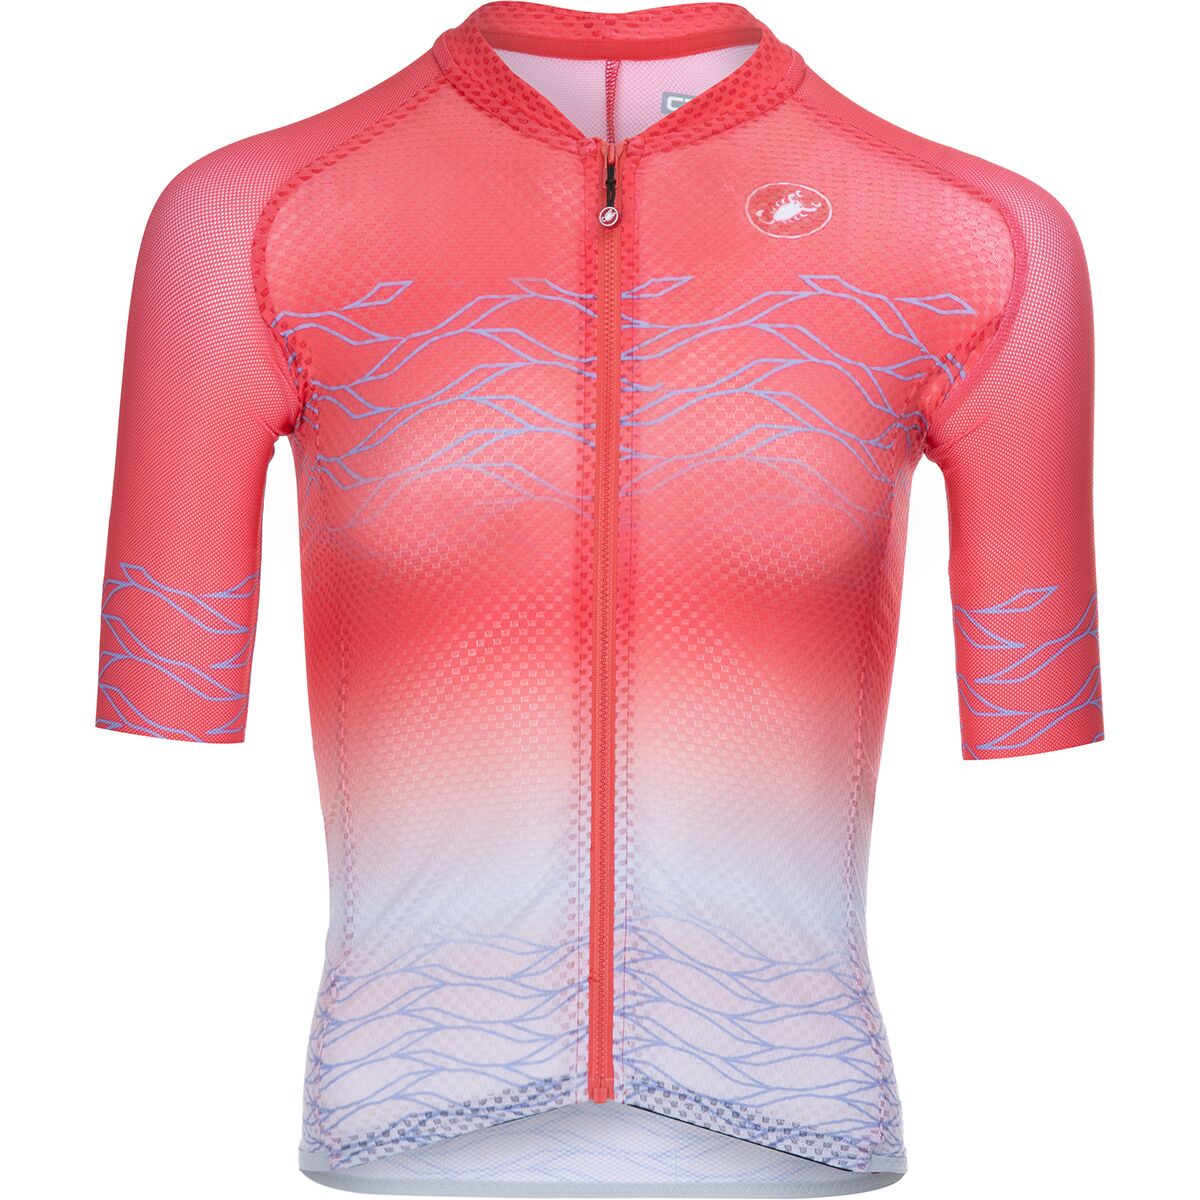 Castelli Climber's 2.0 Limited Edition Jersey - Women's